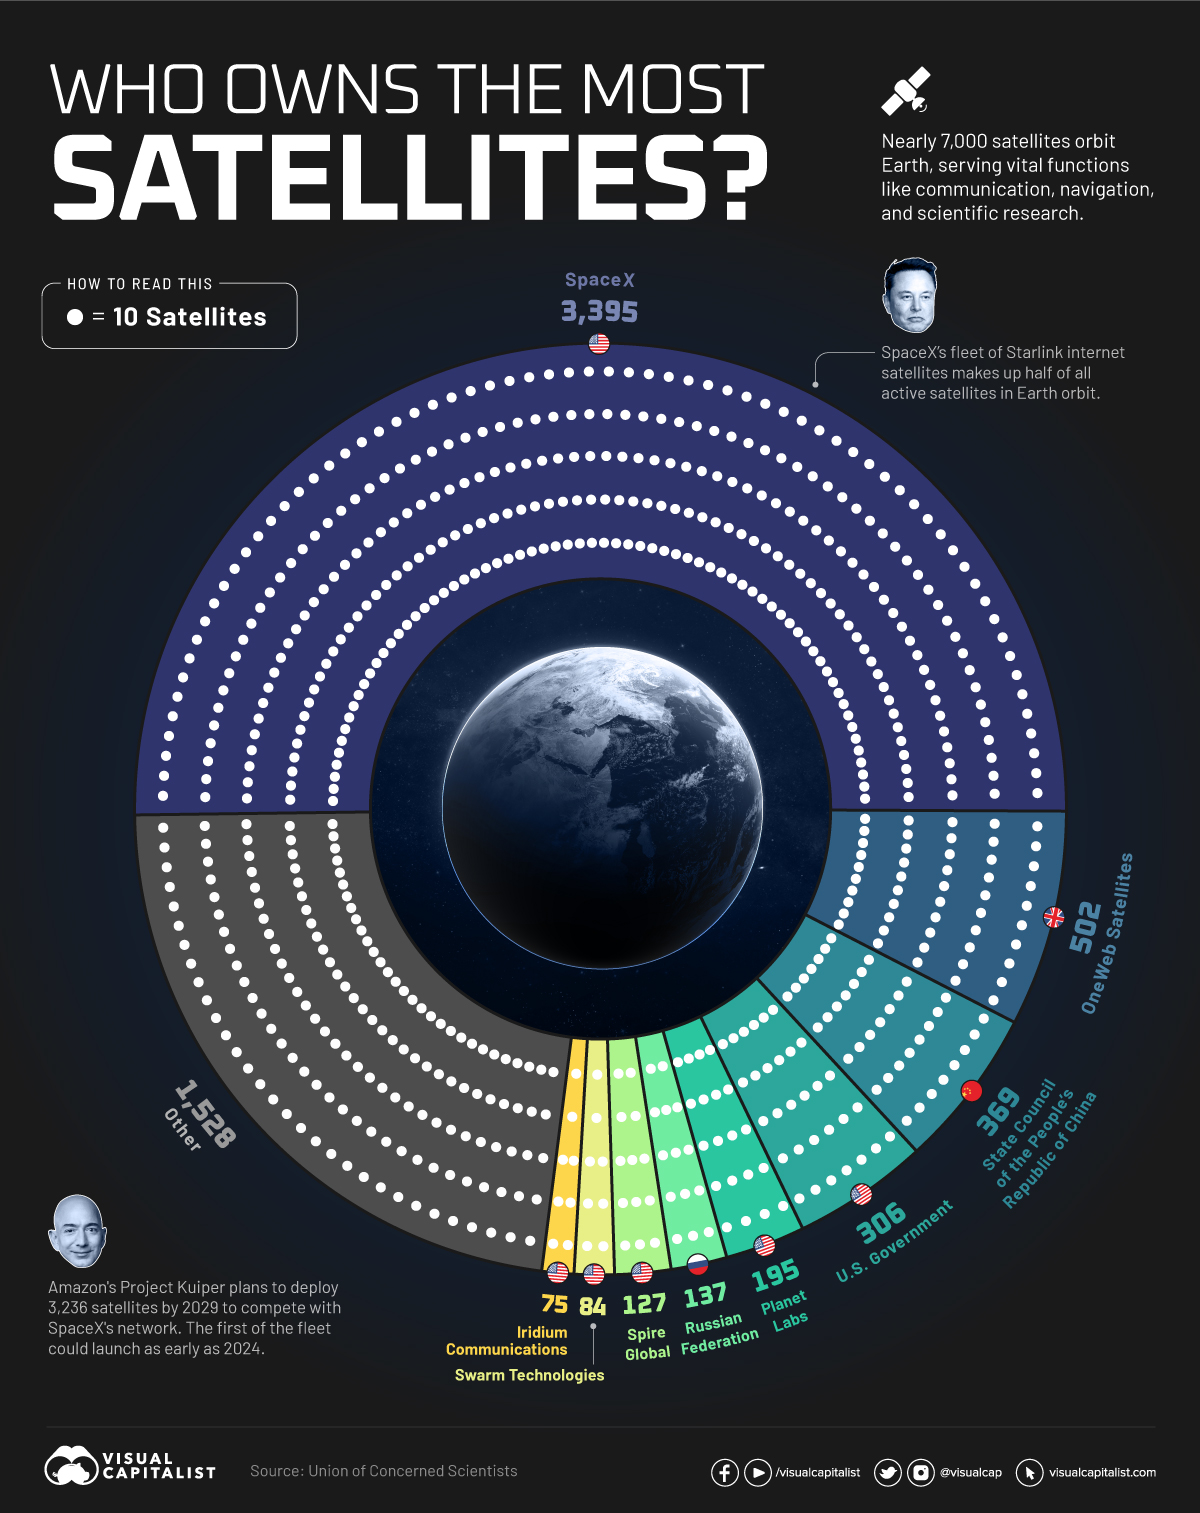 OC_Who-Owns-the-Most-Satellites_Sep-13.jpg